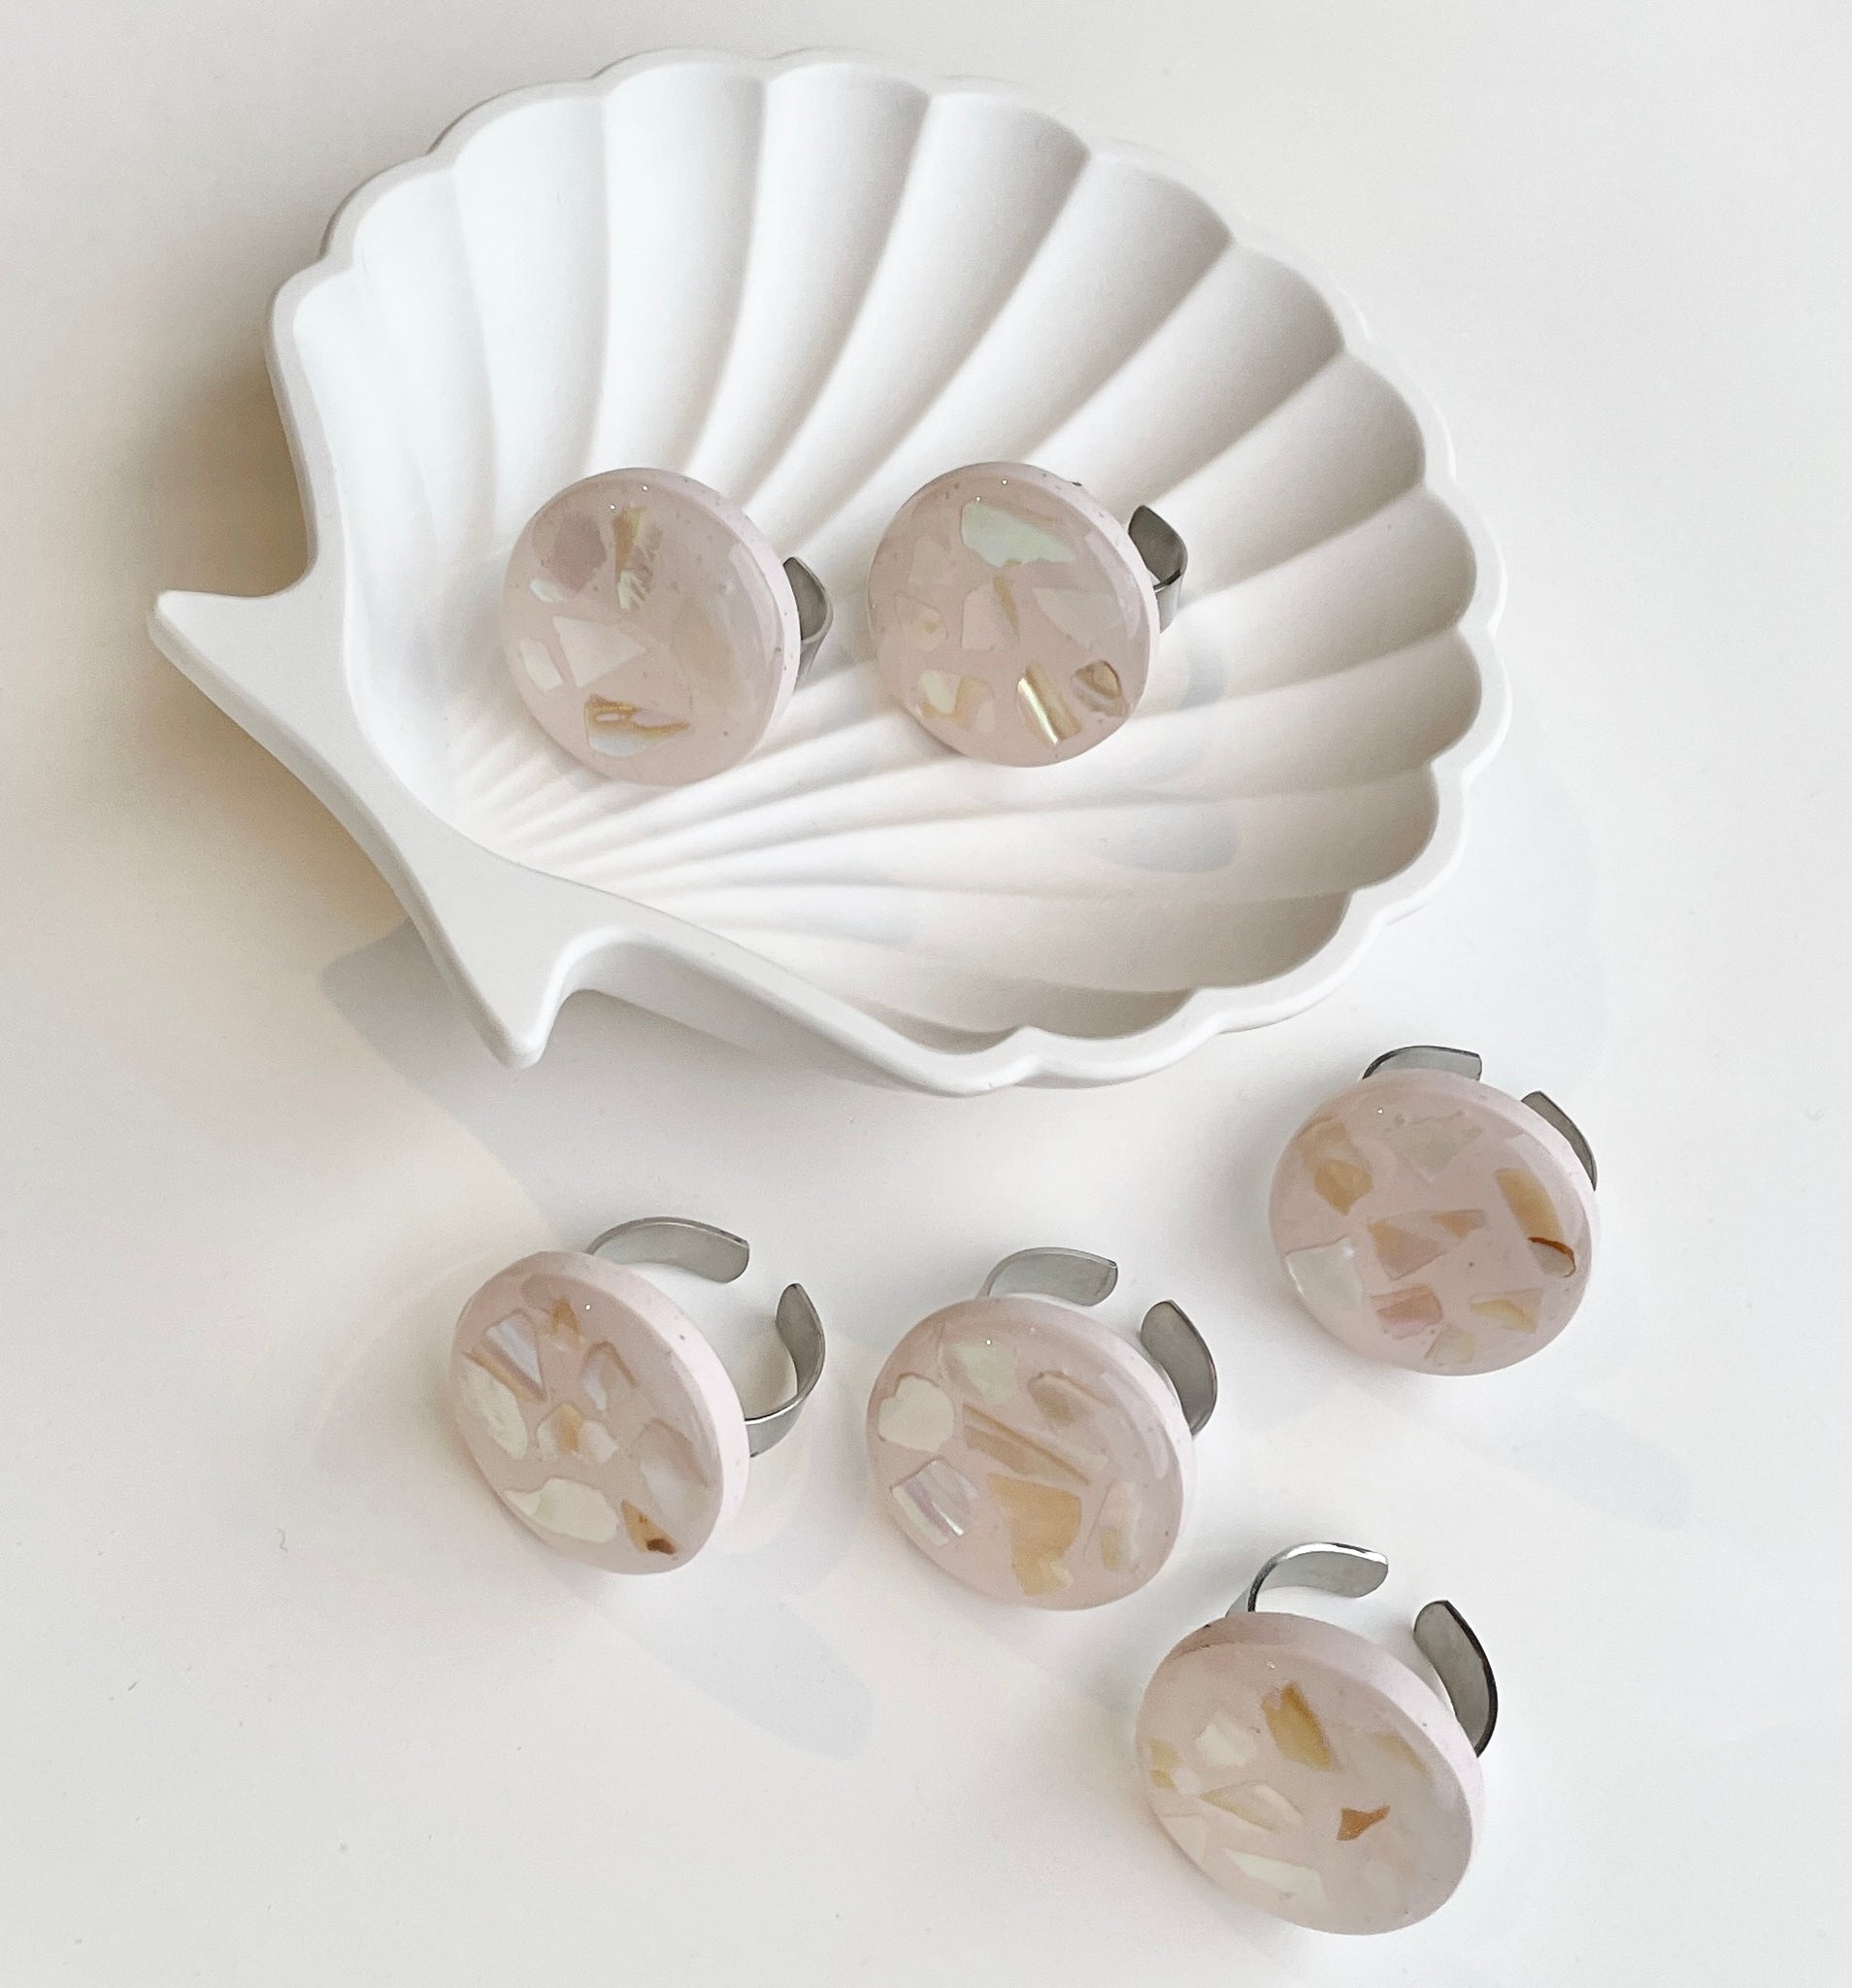 Shell crush resin coated adjustable rings - Large 2.5cm